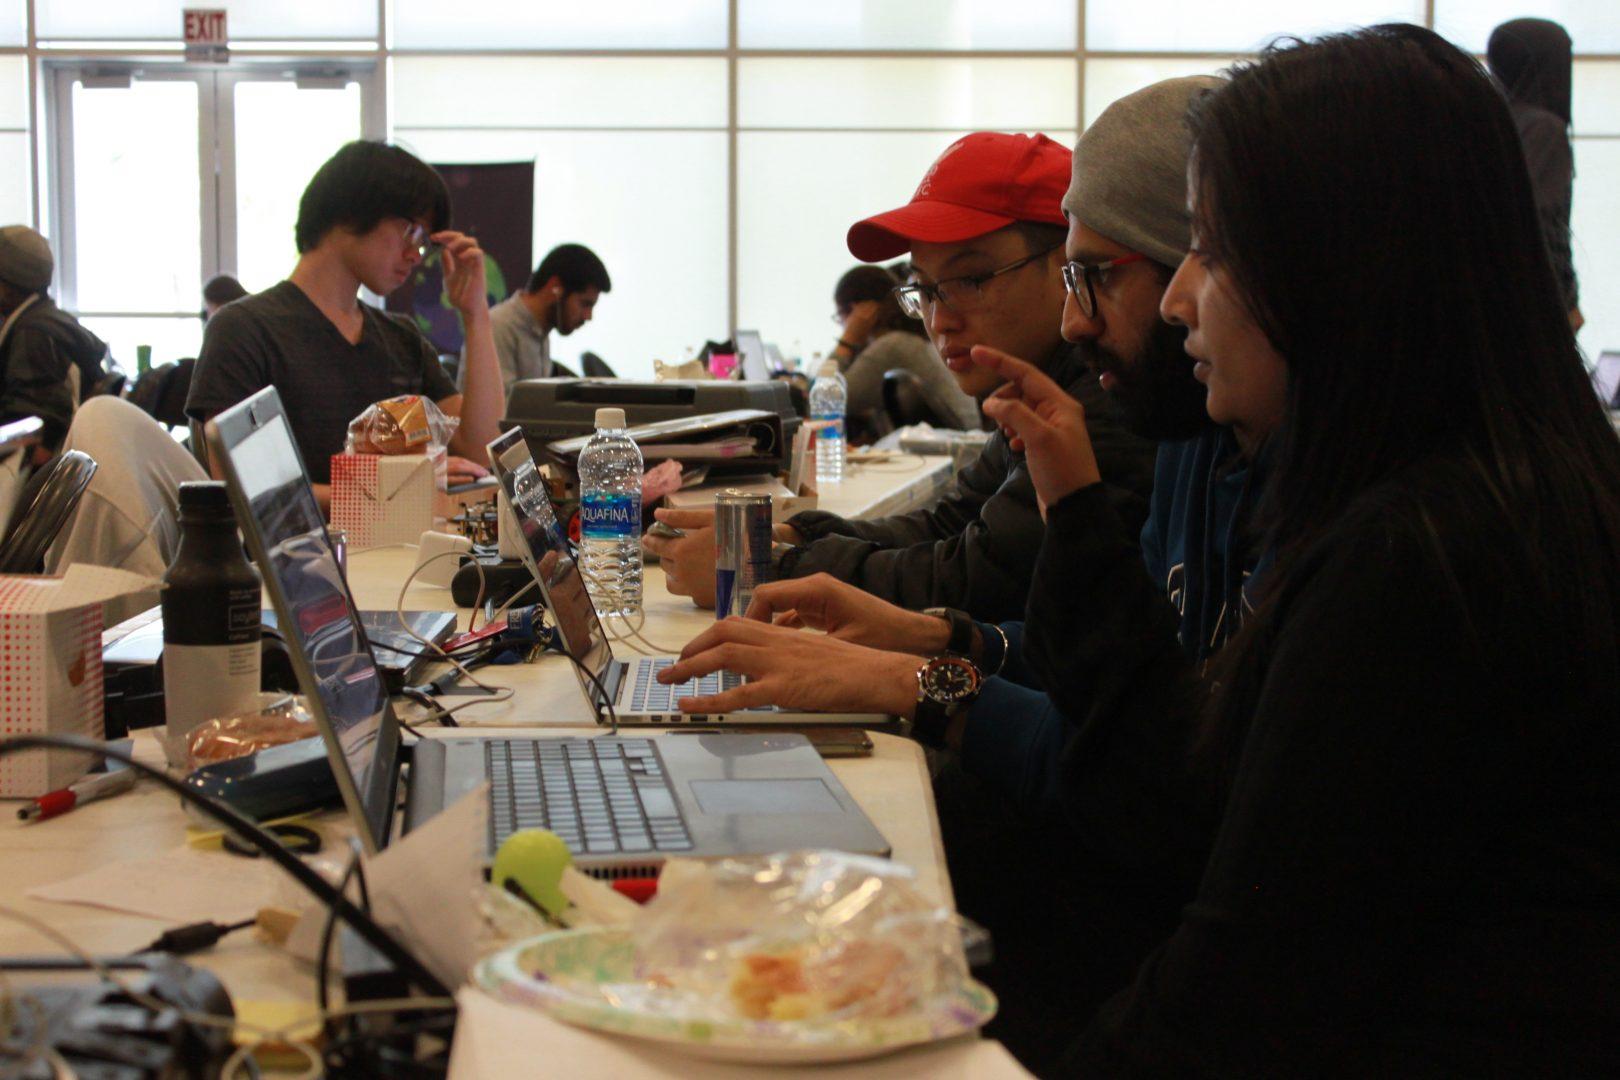 Students working together to finish their projects in the final hours of the 24-hour HackFresno hackathon i the North Gym on April 15, 2017. (Jessica Johnsen/The Collegian)